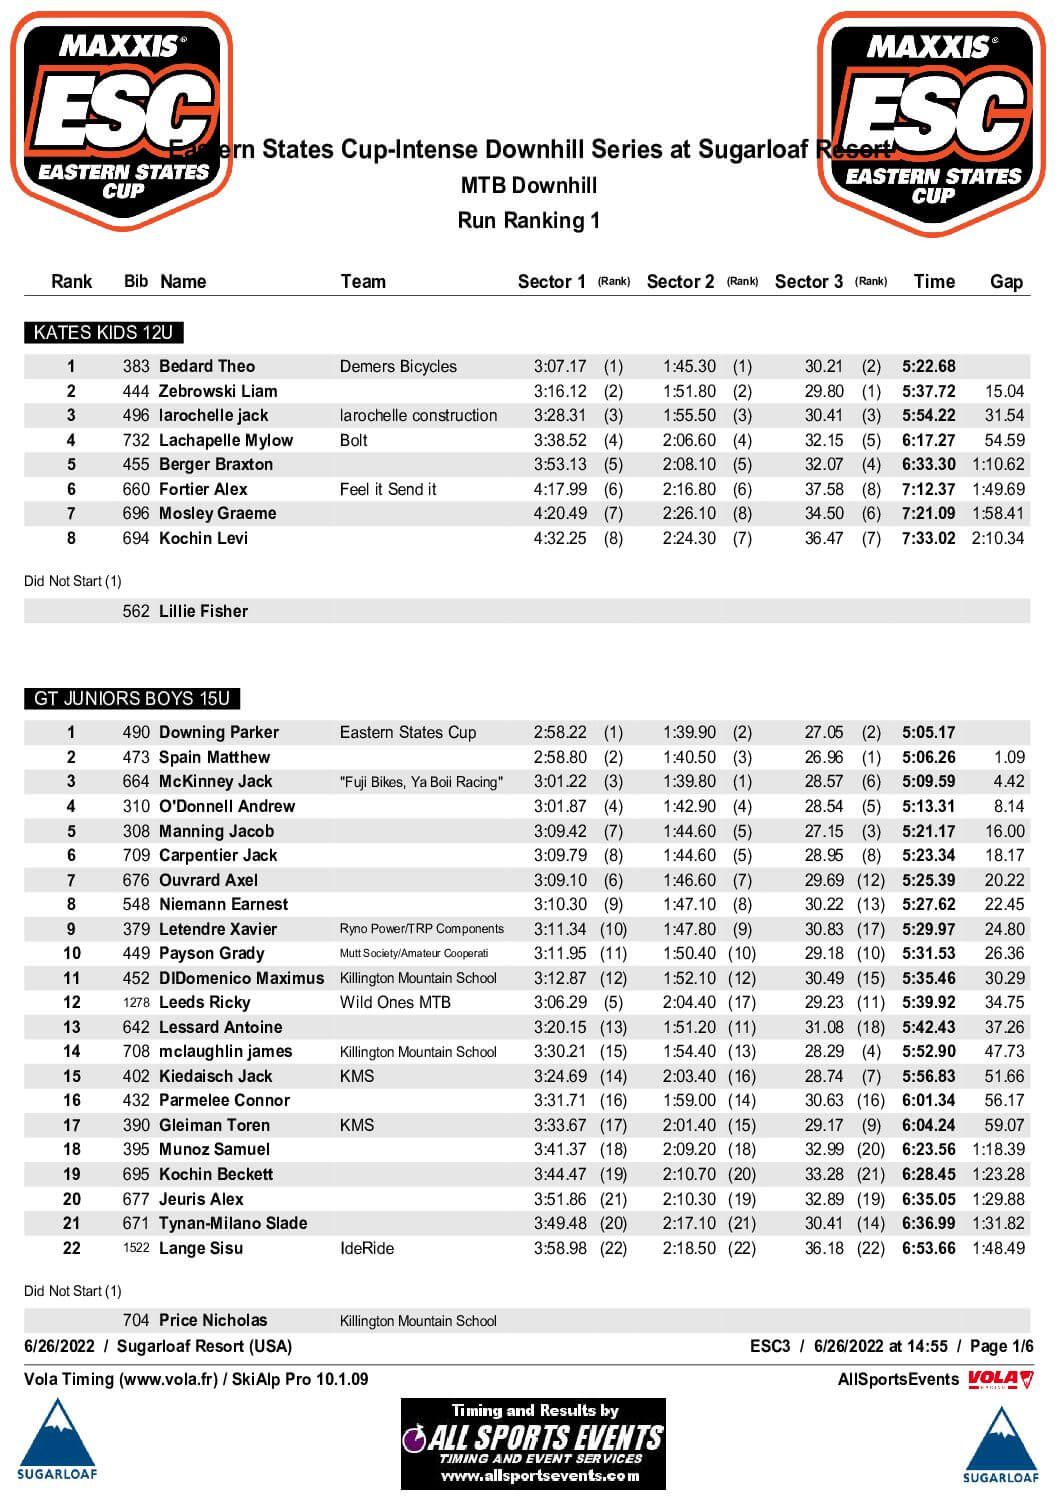 Sugarloaf Final Results by Class